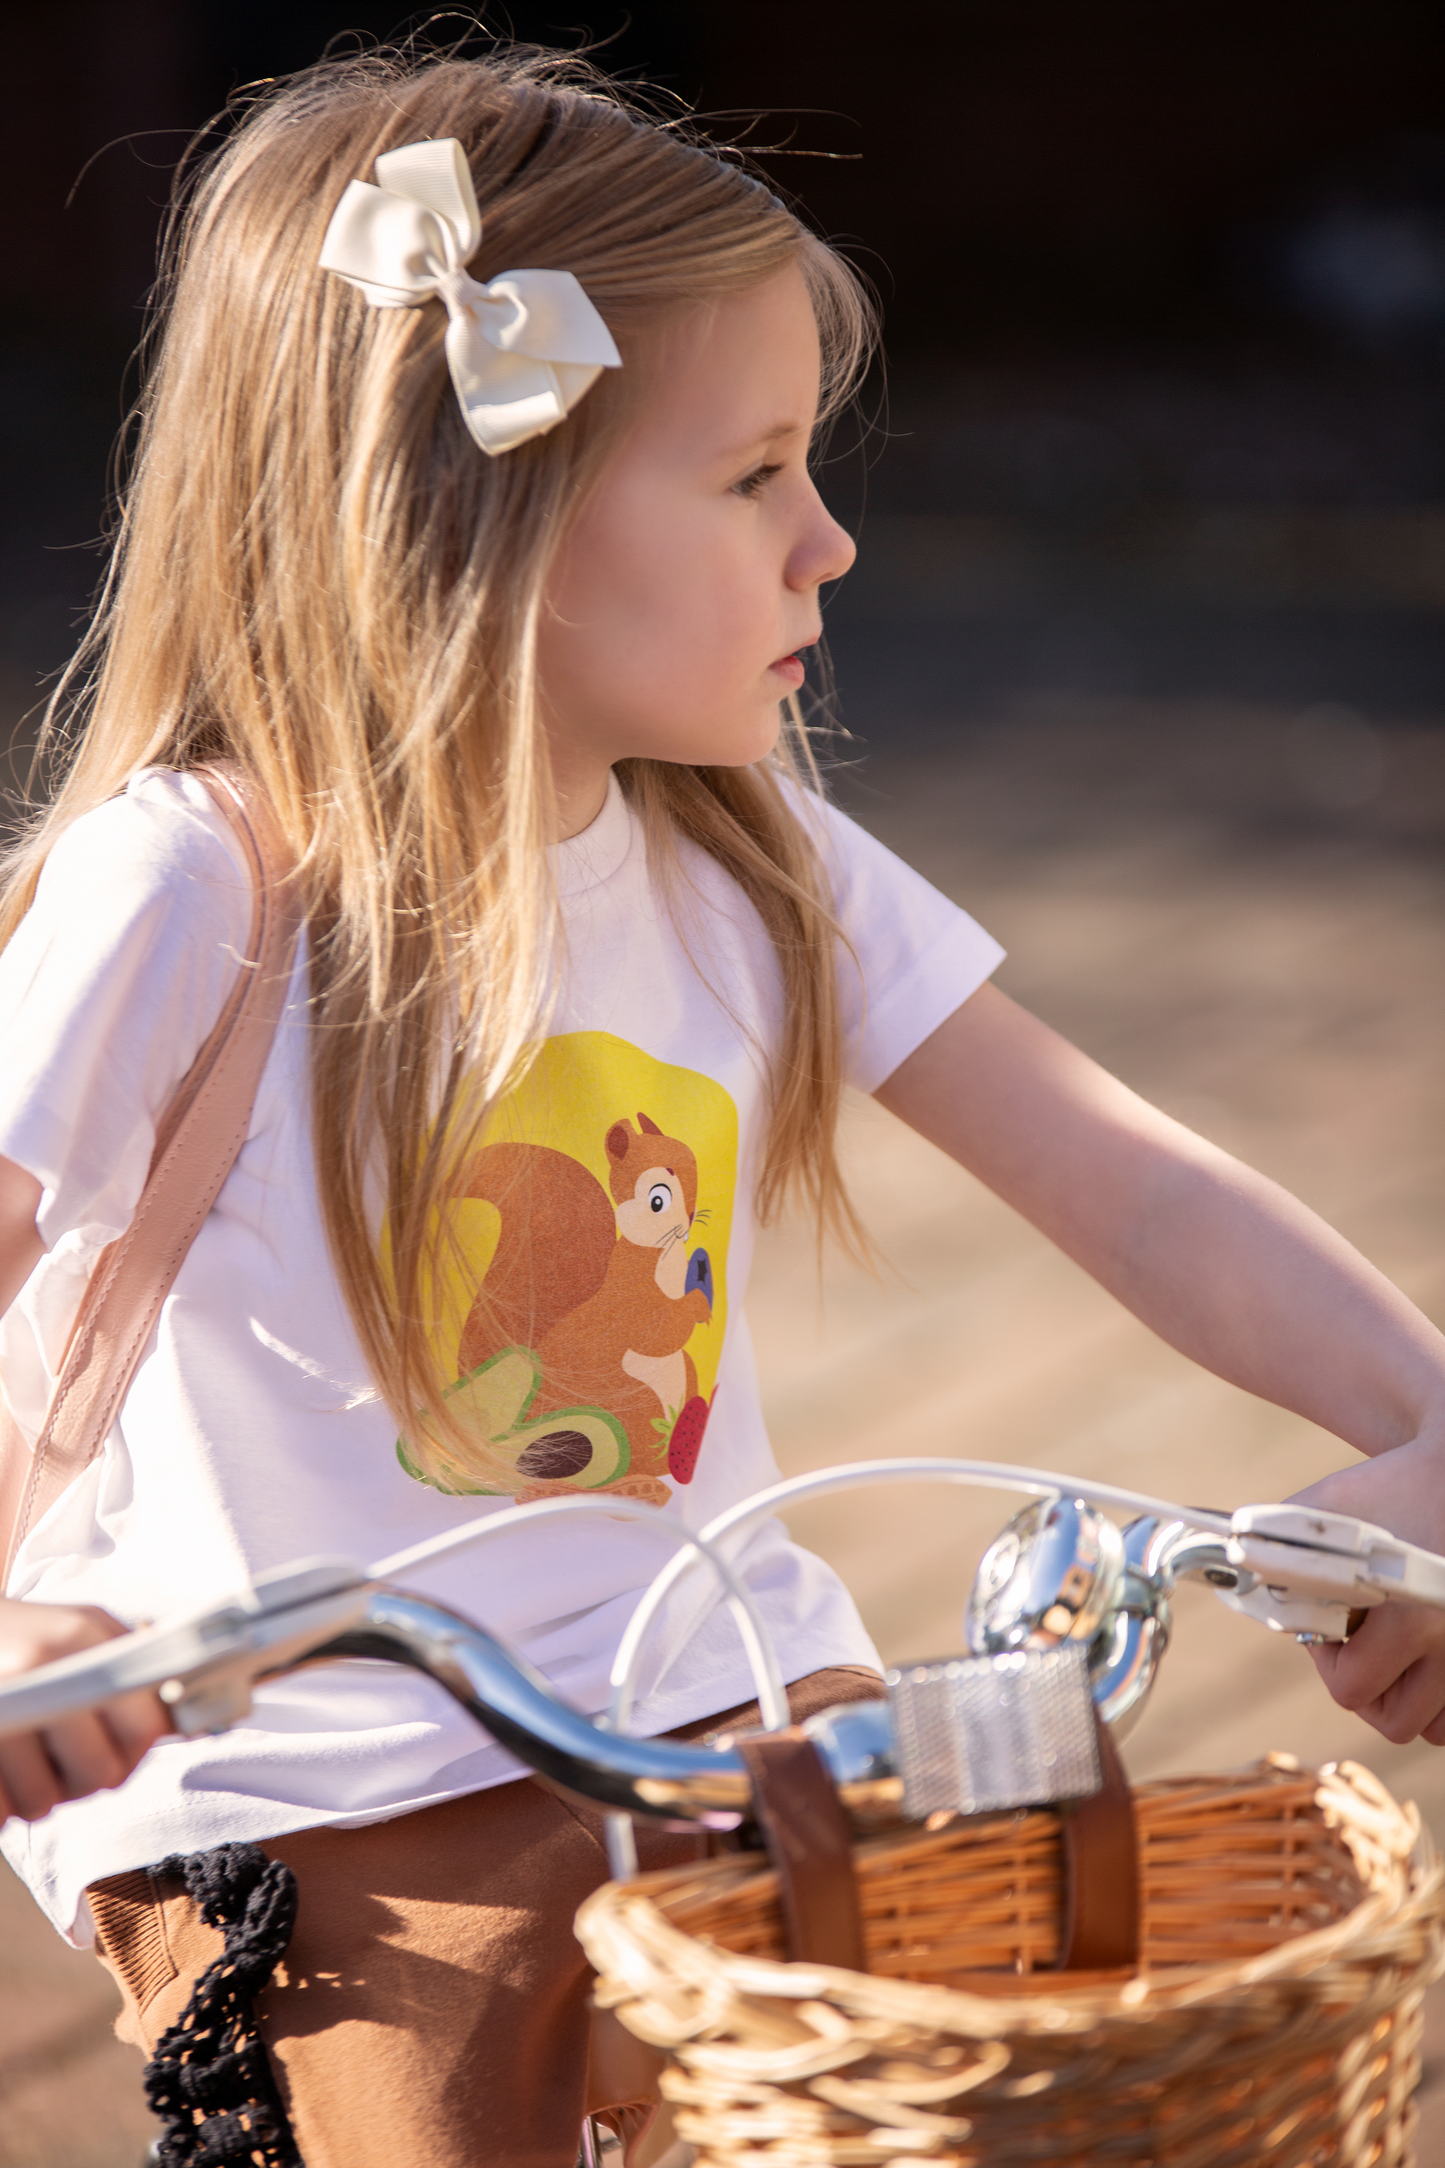 Squirrel White Organic Cotton T-Shirt for Kids: Sustainable and Stylish T-Shirt Inspired by the Playful Squirrels of Hyde Park